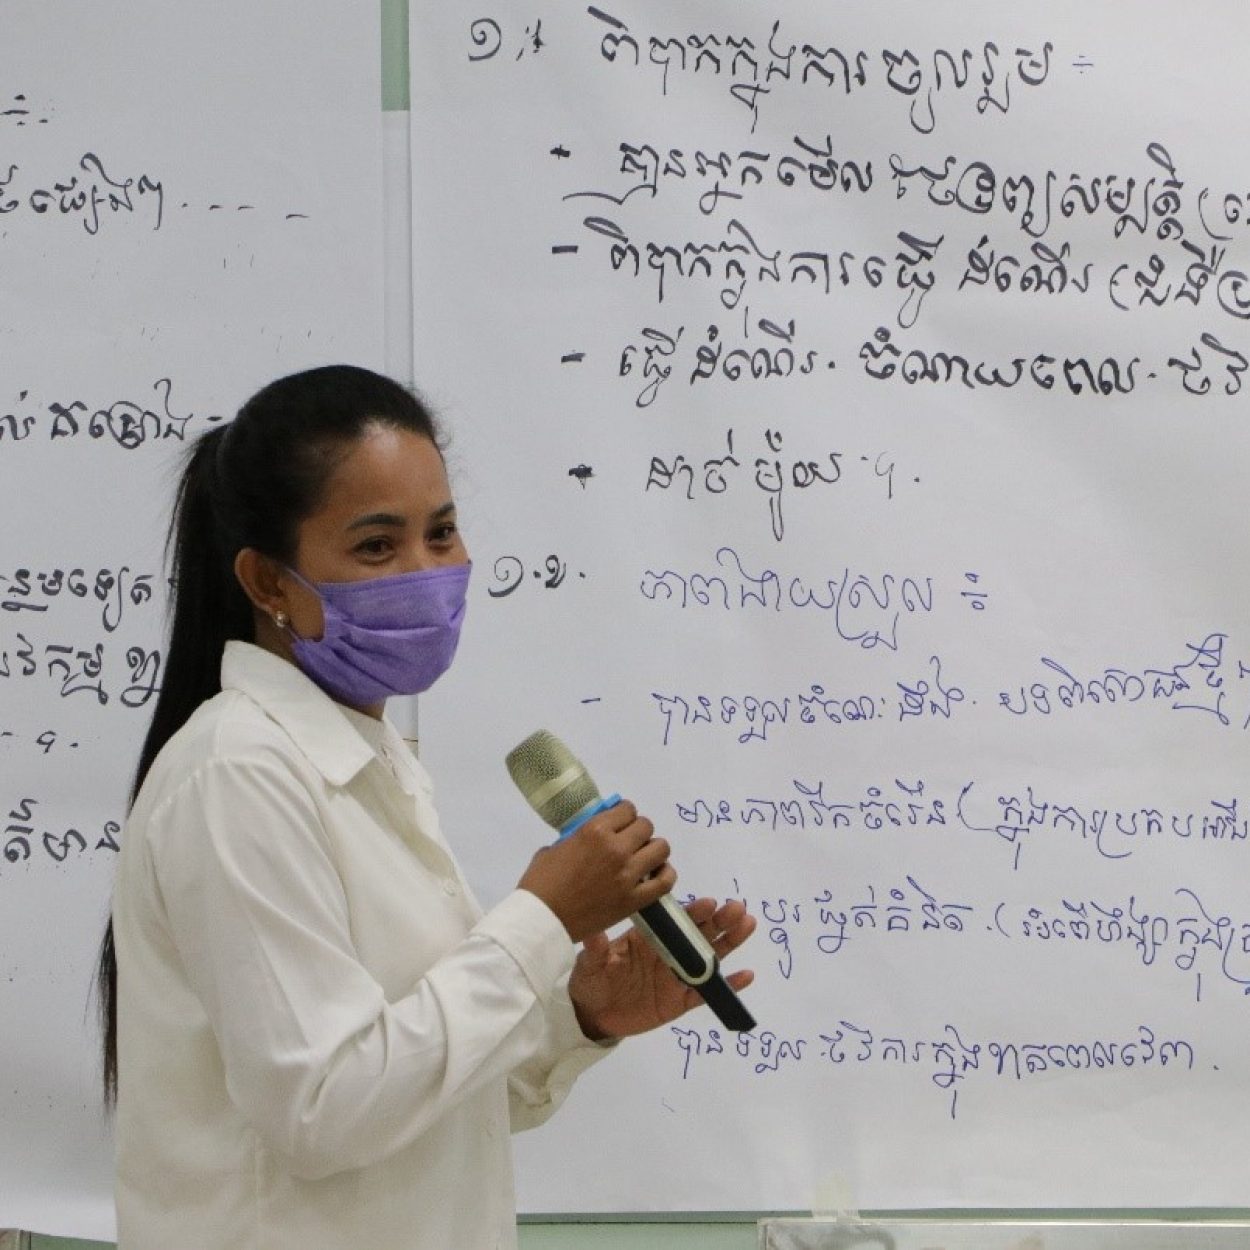 A person is wearing a face mask and speaking into a handheld microphone